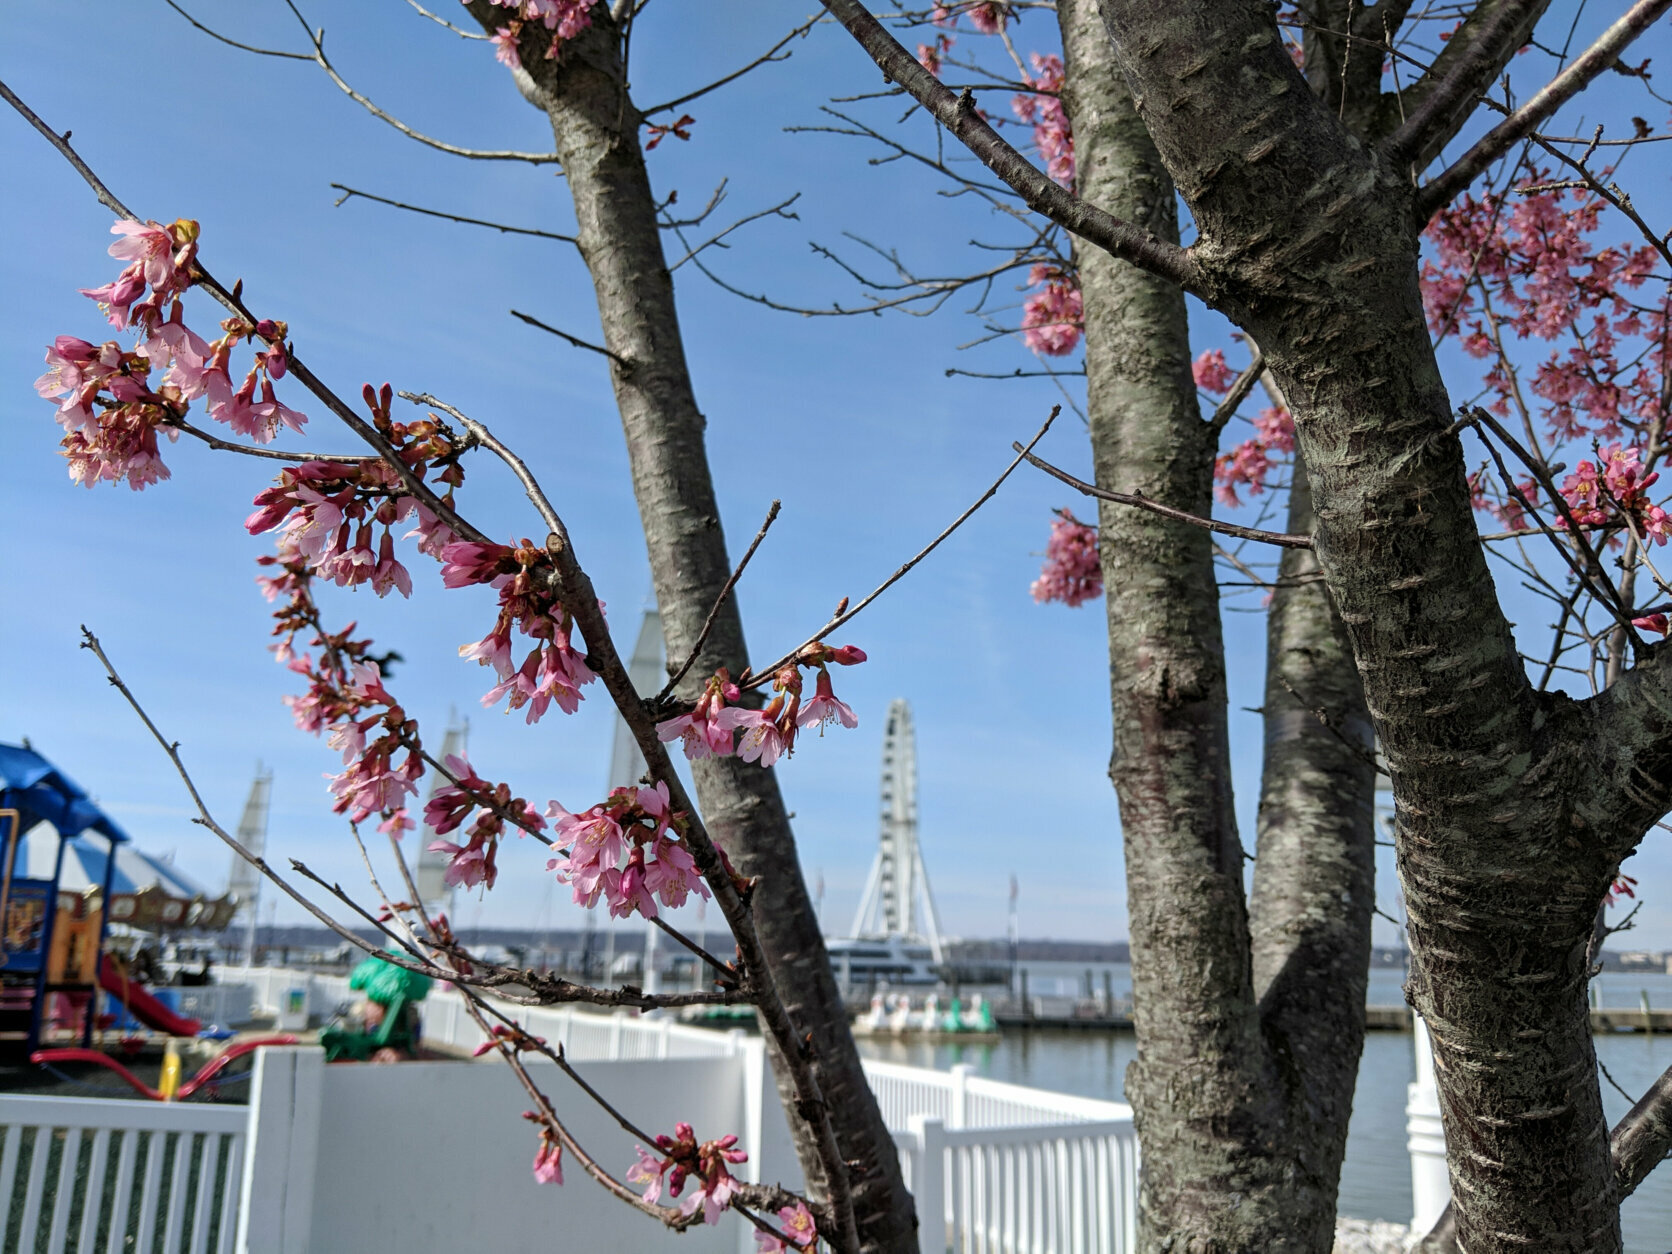 A view of the blossoms on the young cherry trees at National Harbor in 2019.